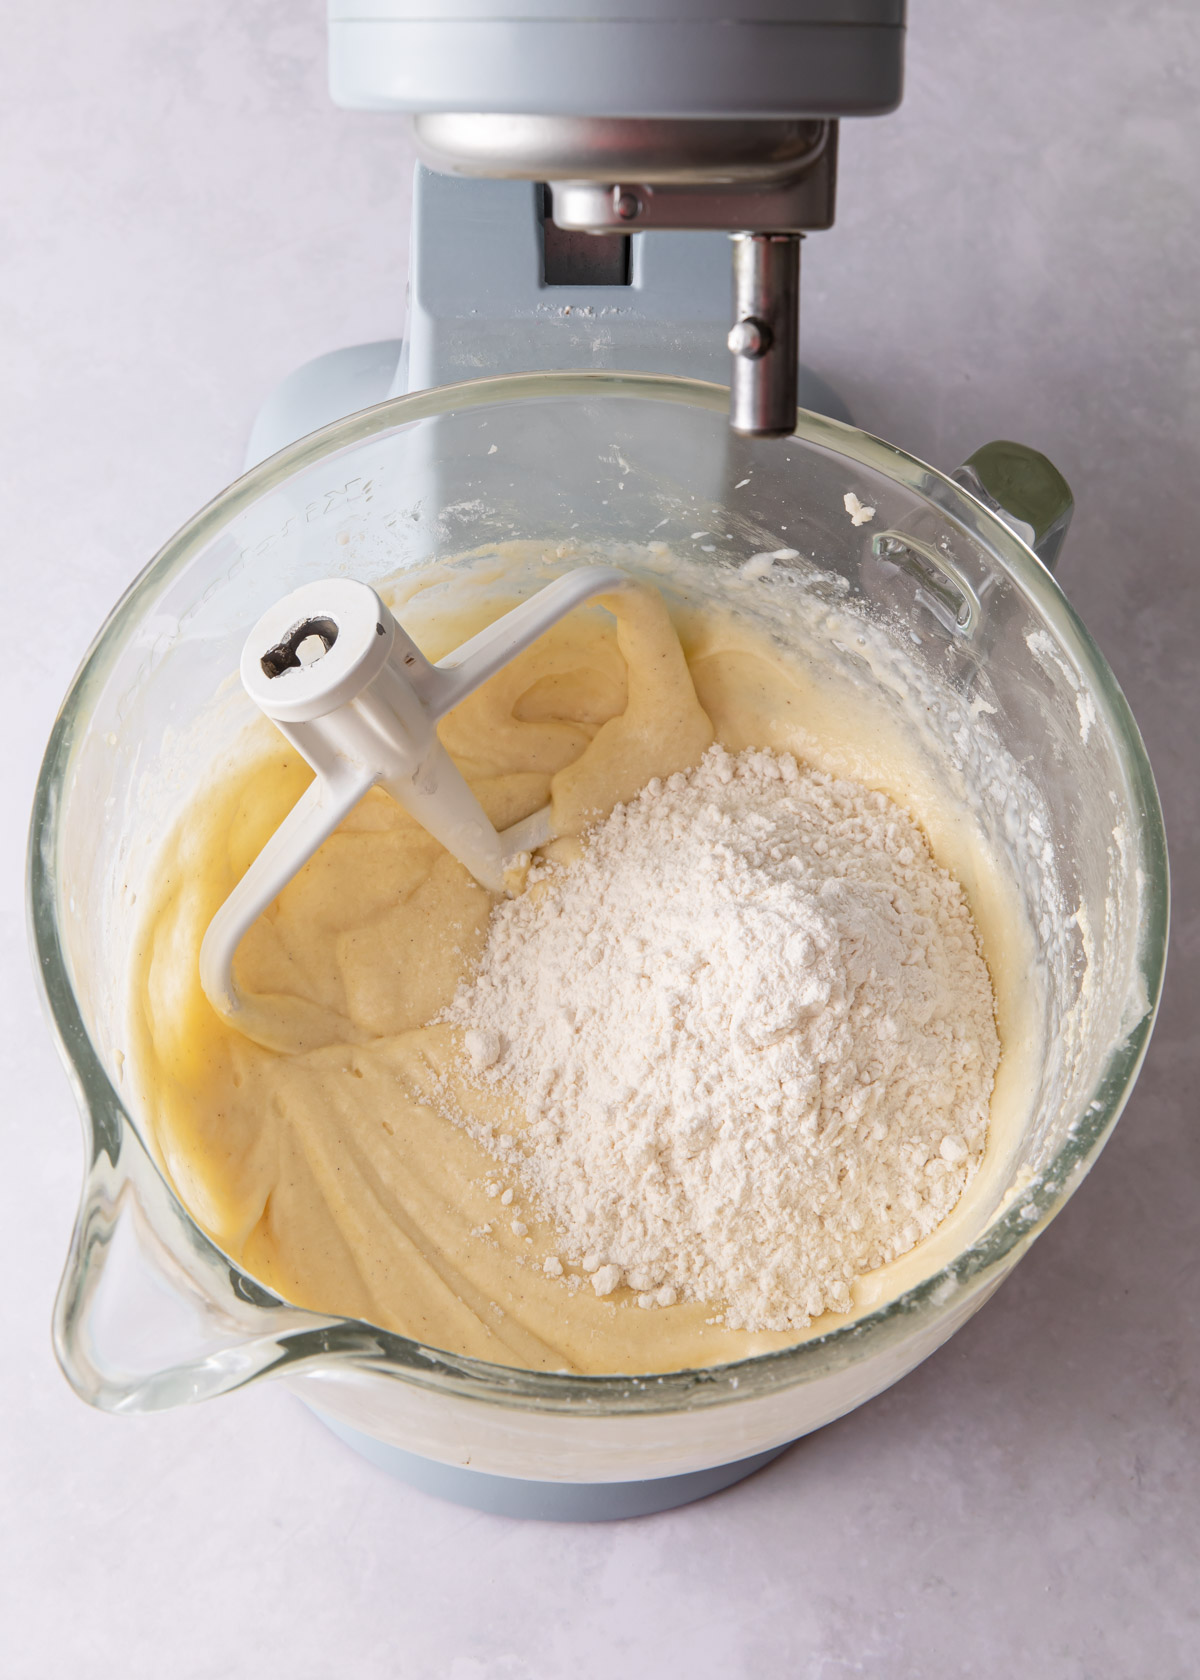 Alternating the flour and milk in the creaming method